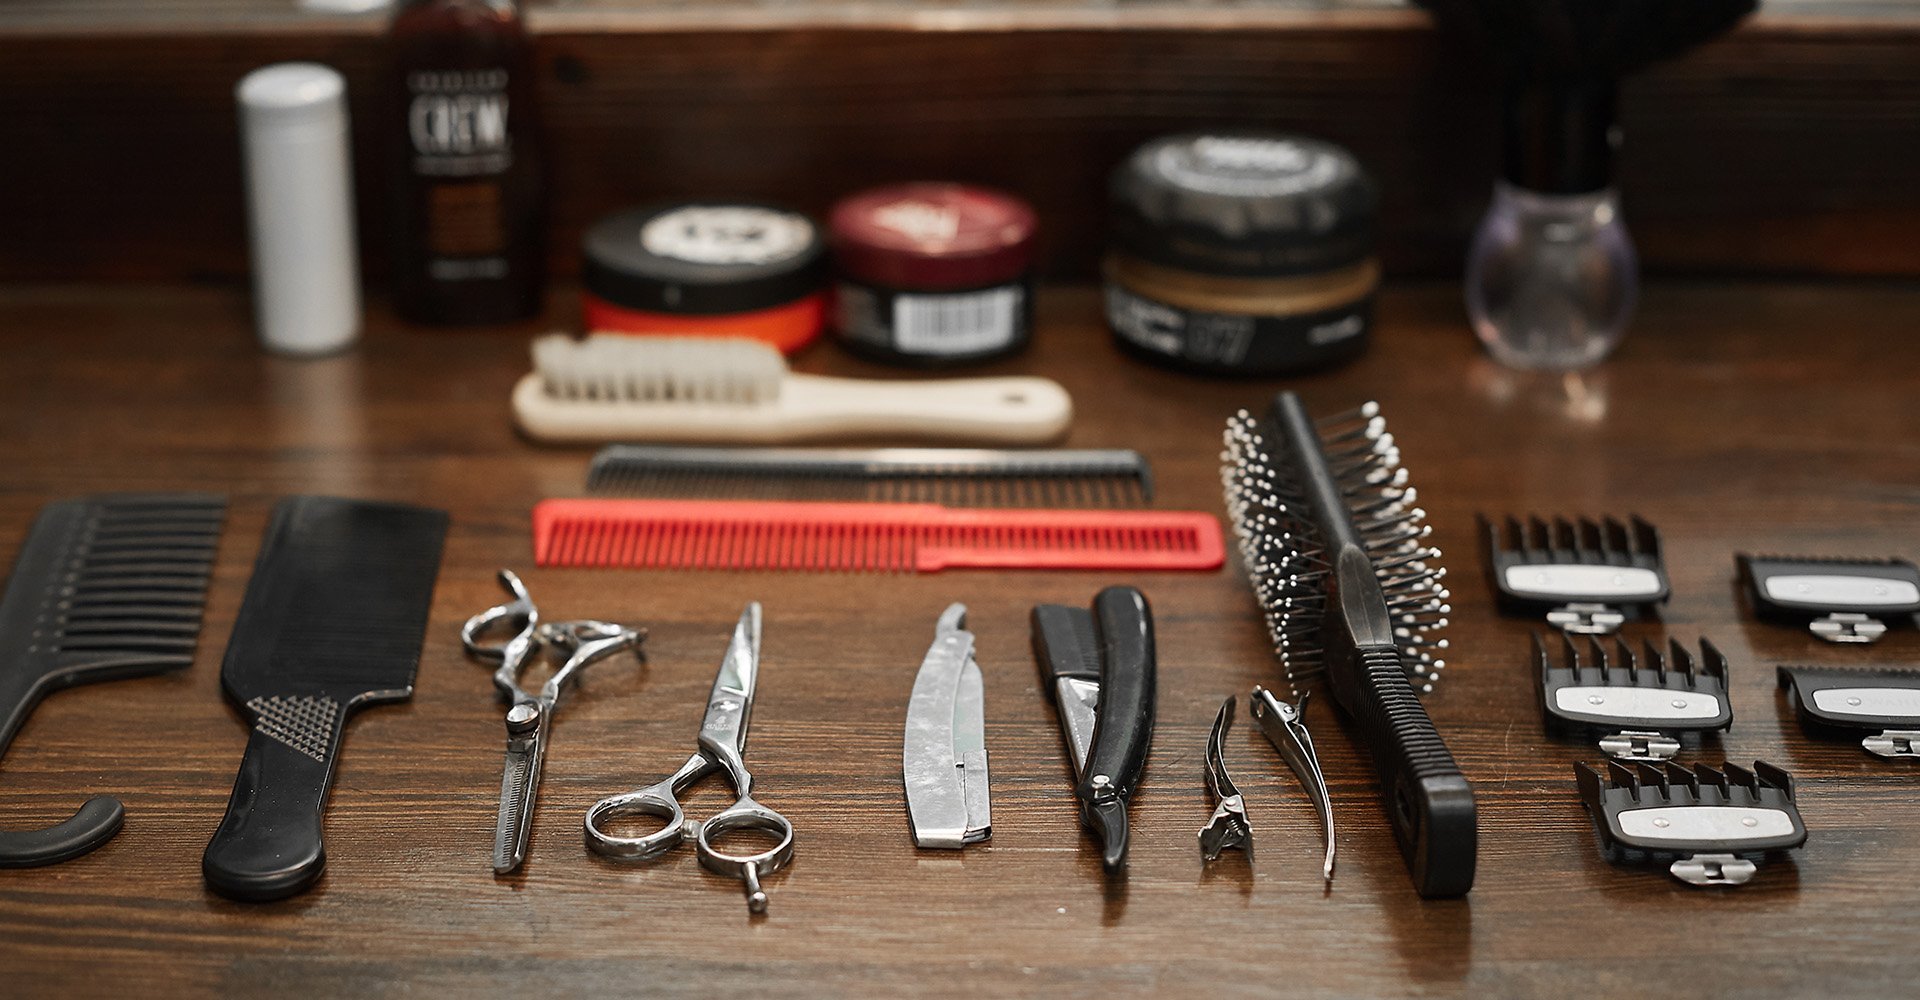 A table with barber shop tools